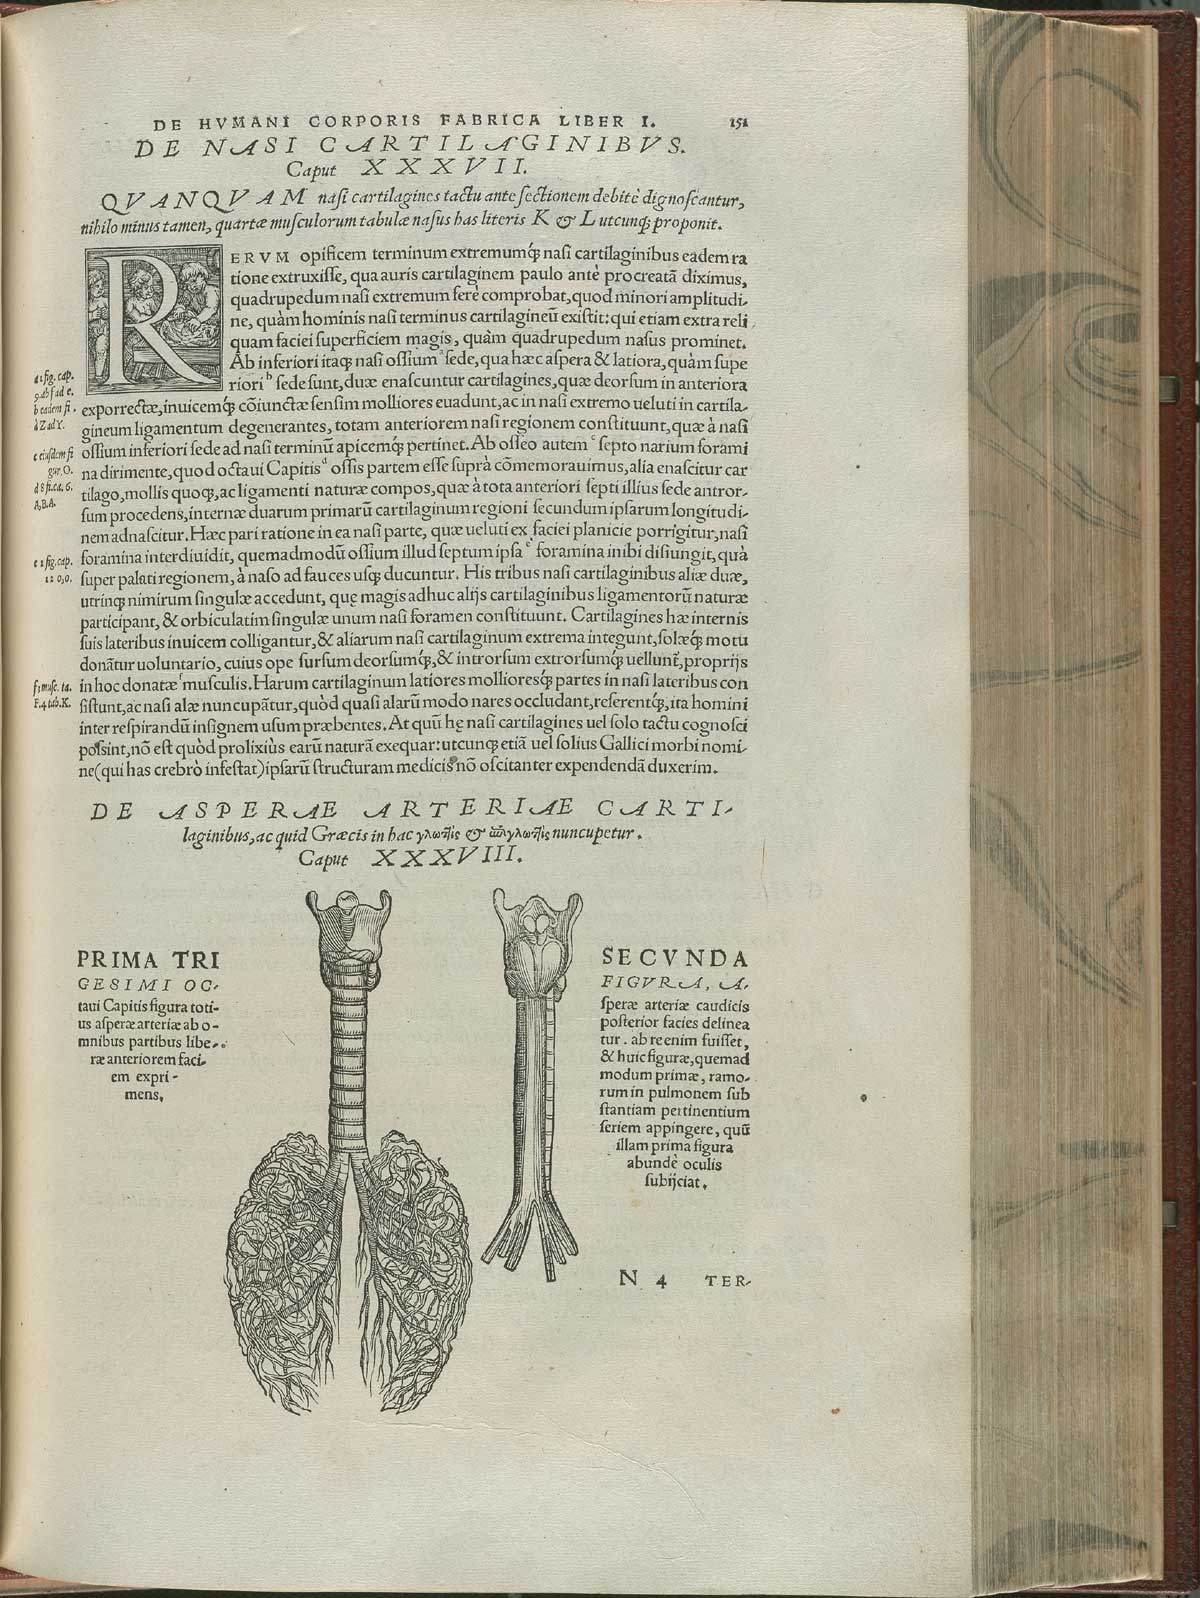 Page 151 of Andreas Vesalius' De corporis humani fabrica libri septem, featuring the larynx, trachea and bronchials of the lung.